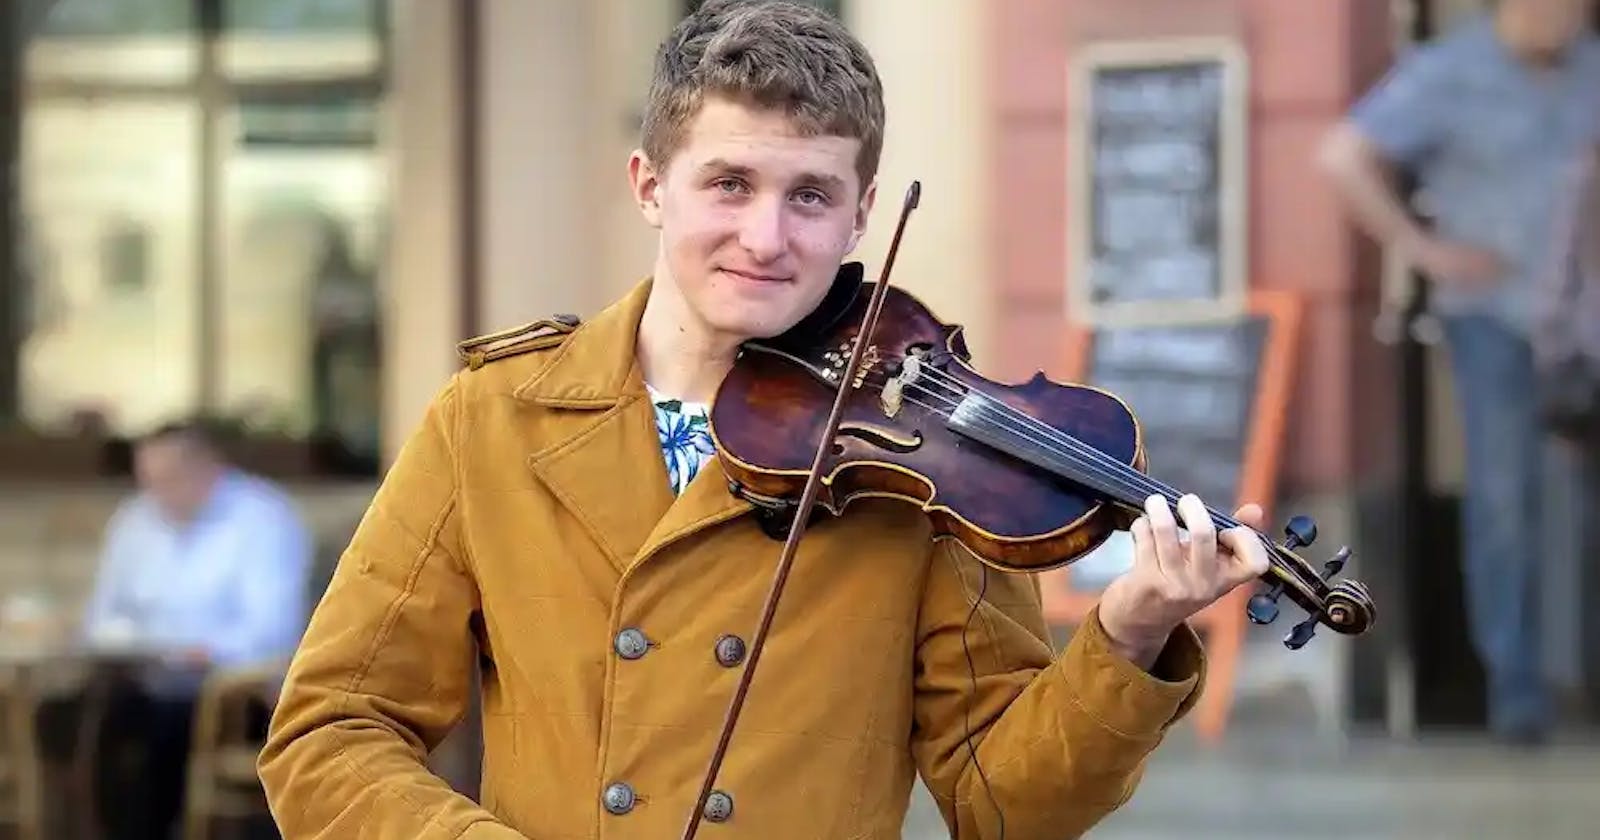 Finding Beauty Everywhere: The Busker's Story